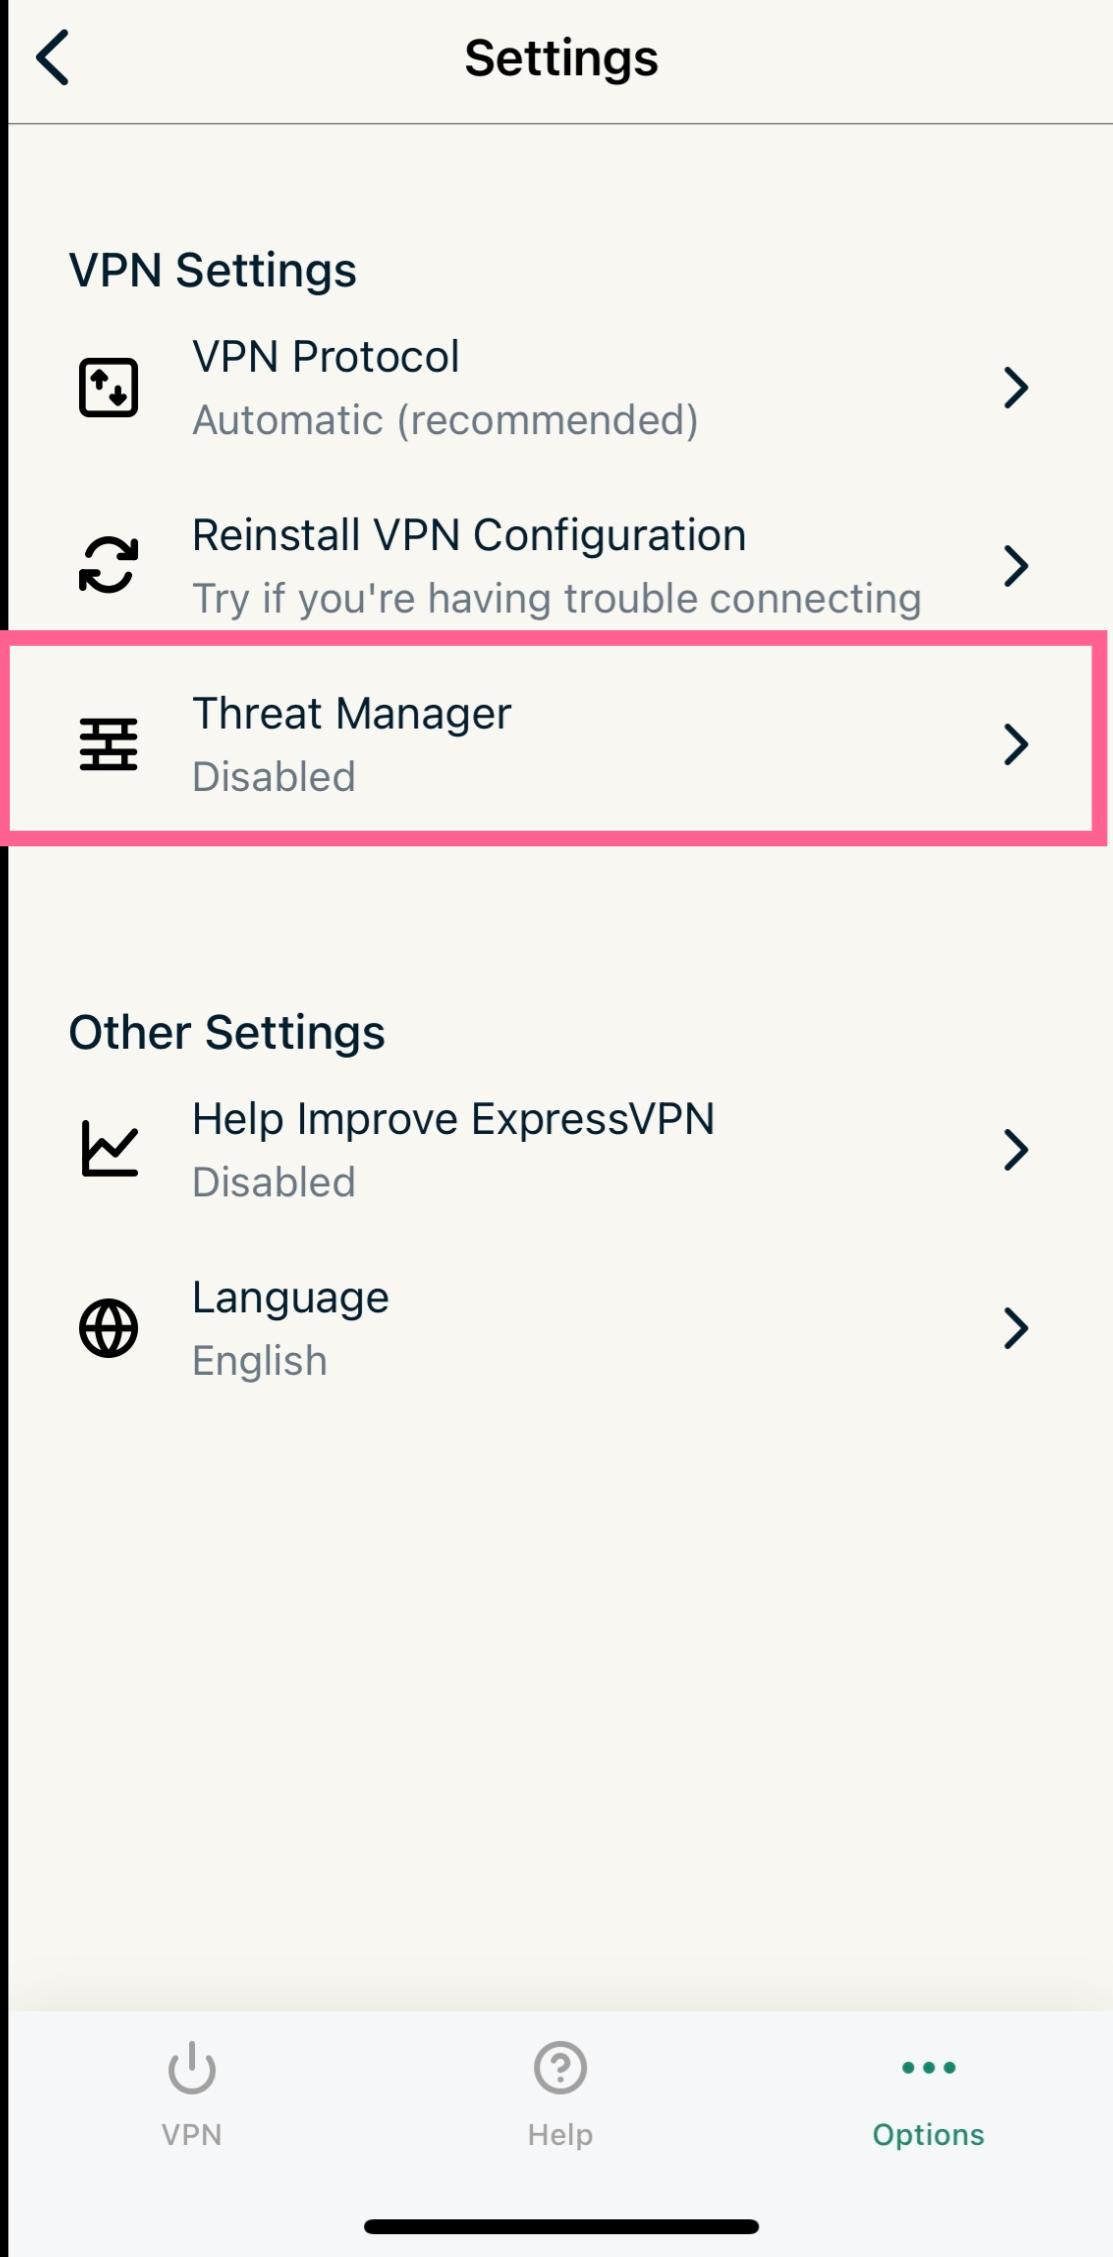 The ExpressVPN threat manager feature is found in the settings menu.